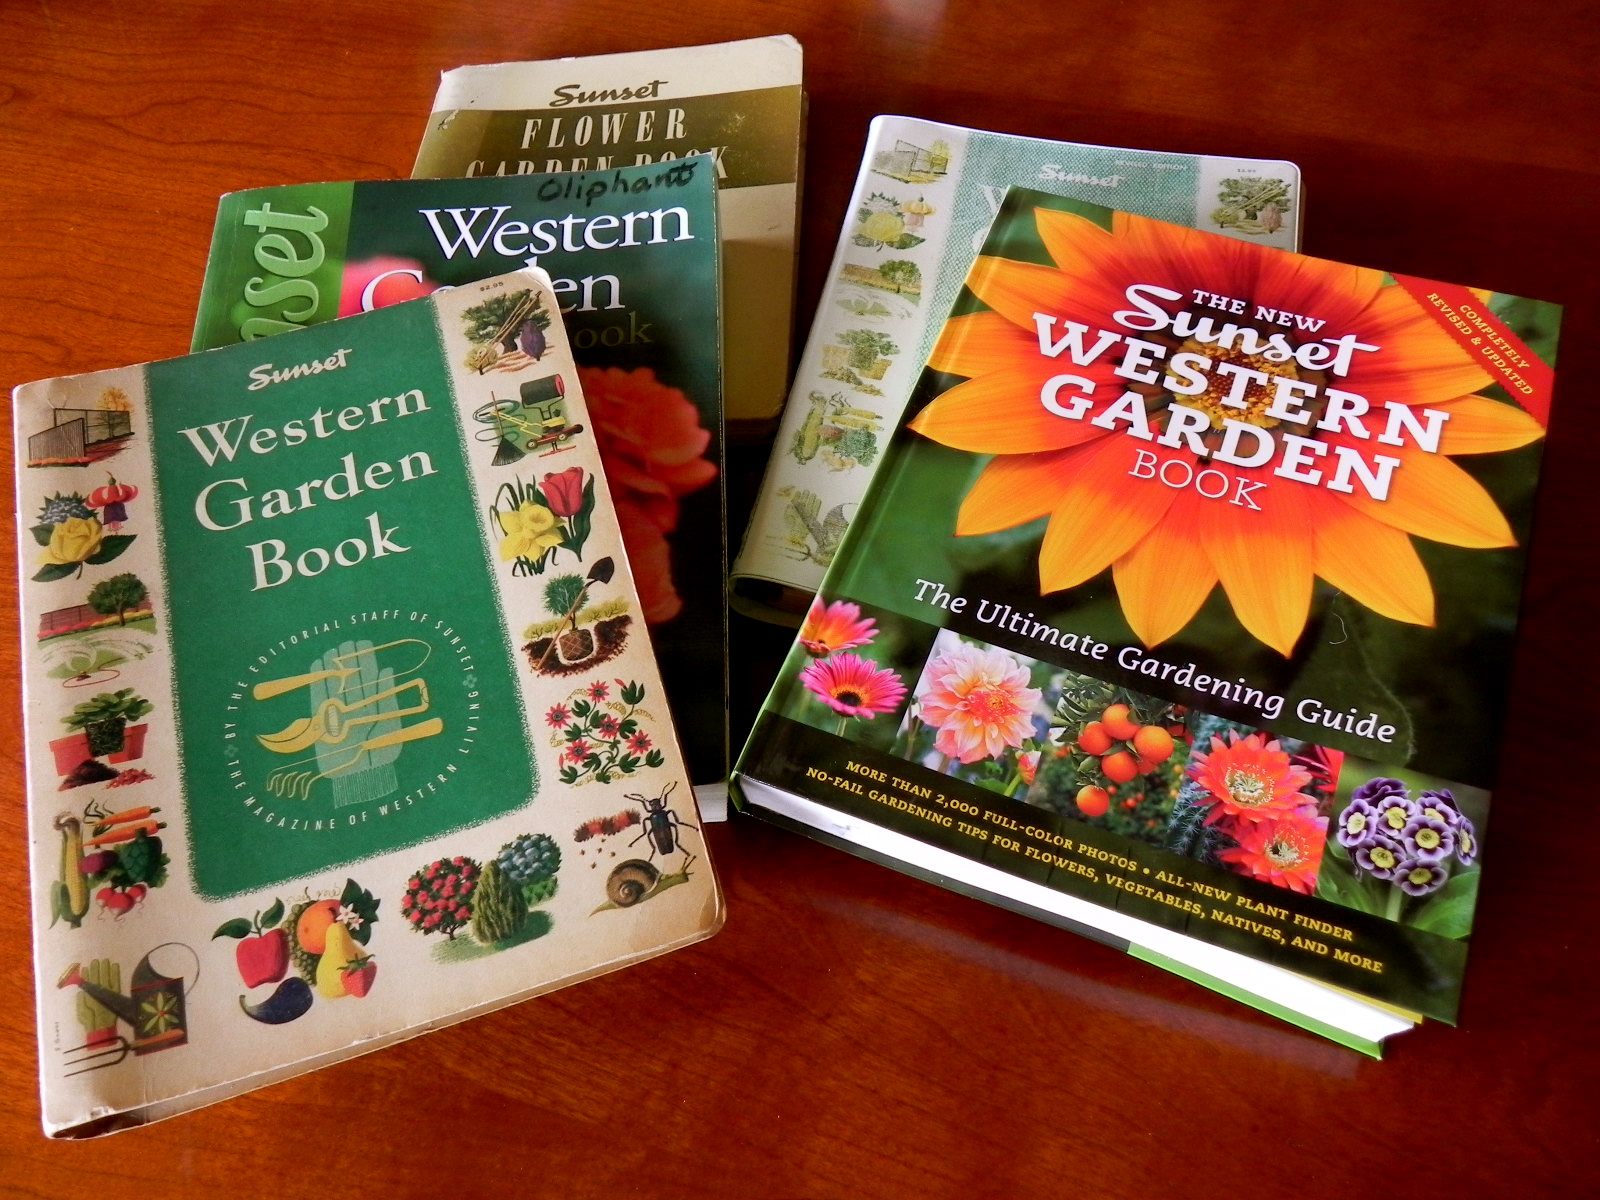 New Sunset Western Garden Book Do You Need It Central Coast